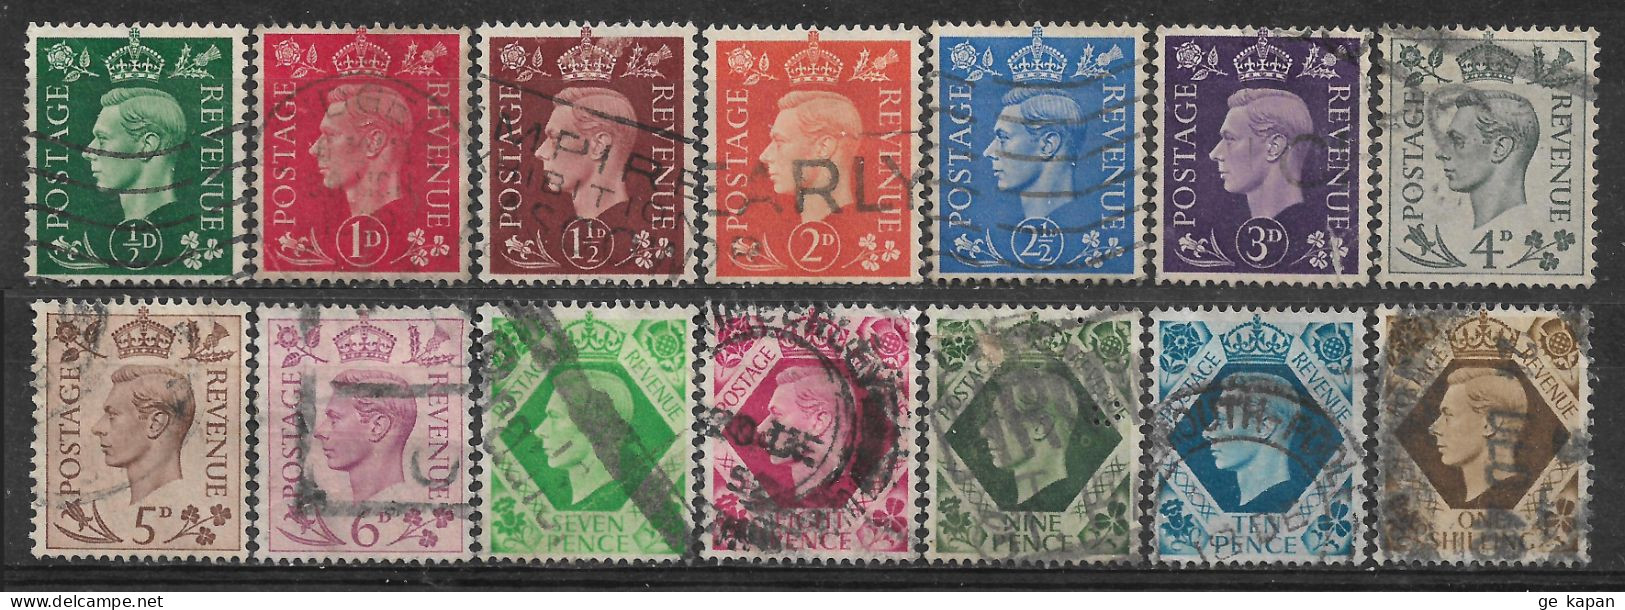 1937-1939 GREAT BRITAIN Complete Set Of 14 Used Stamps (Scott # 235-248) CV $9.10 - Used Stamps